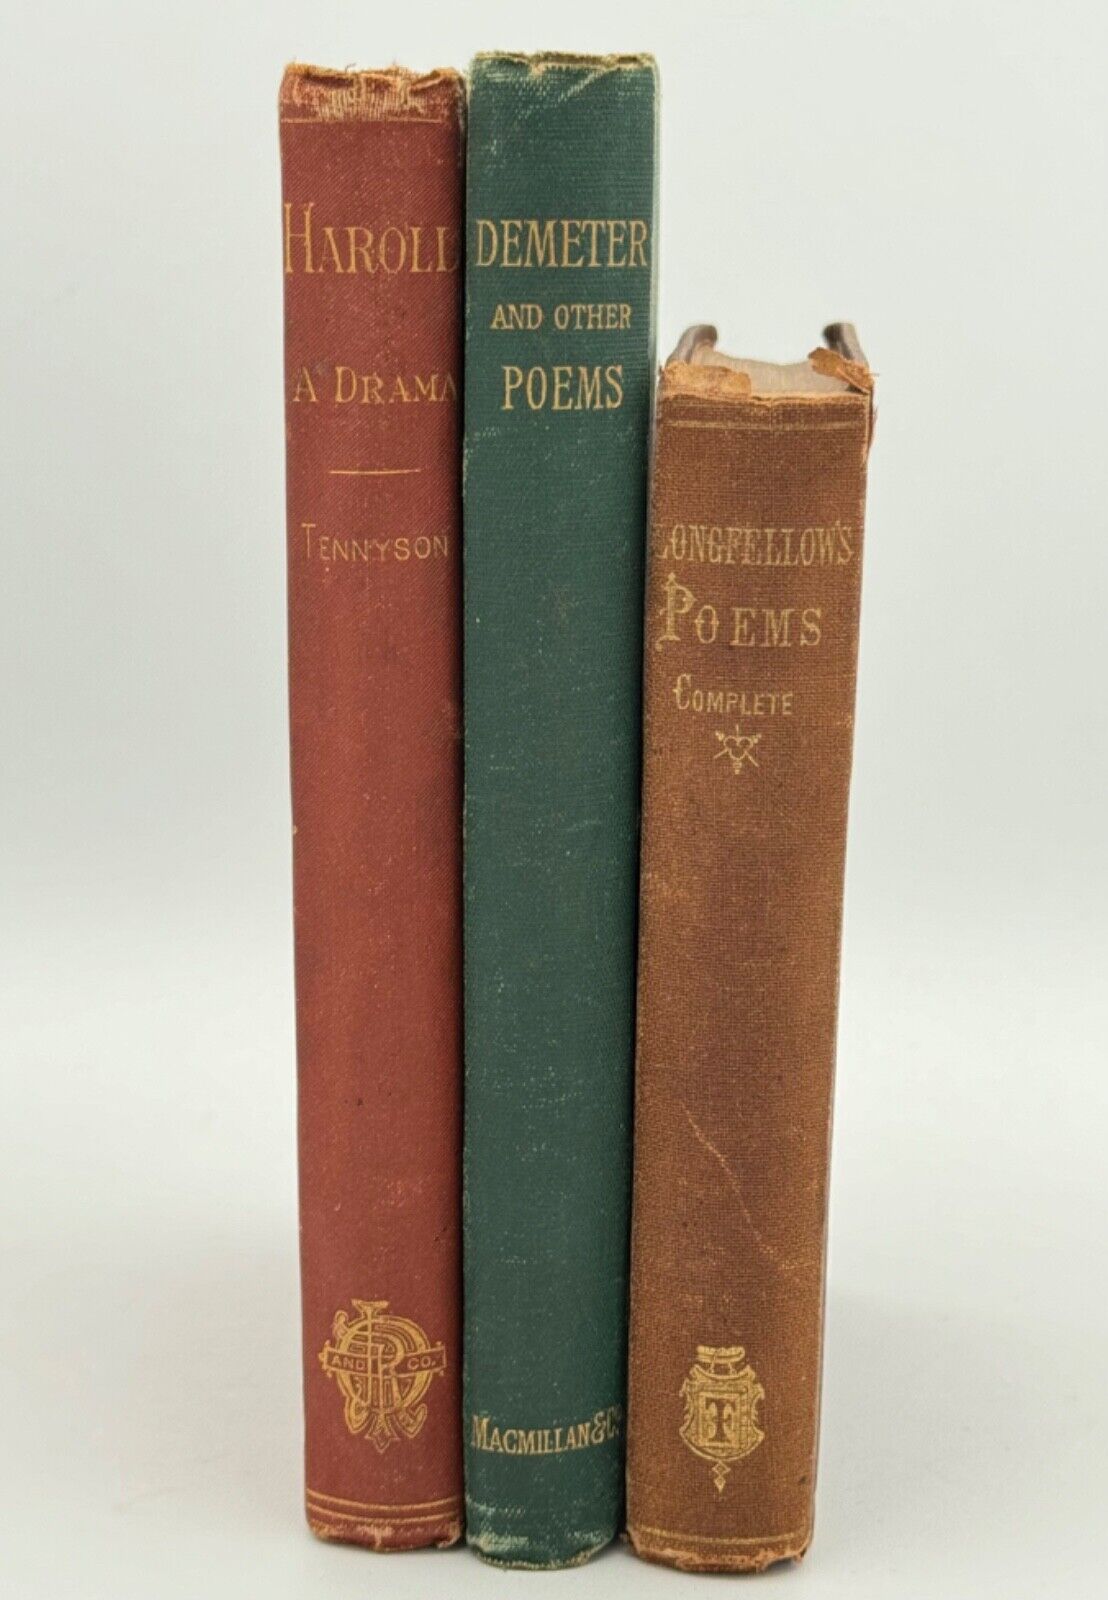 Lot of 3 Antique Poetry Books by Longfellow & Tennyson (Works, Harold, Demeter)